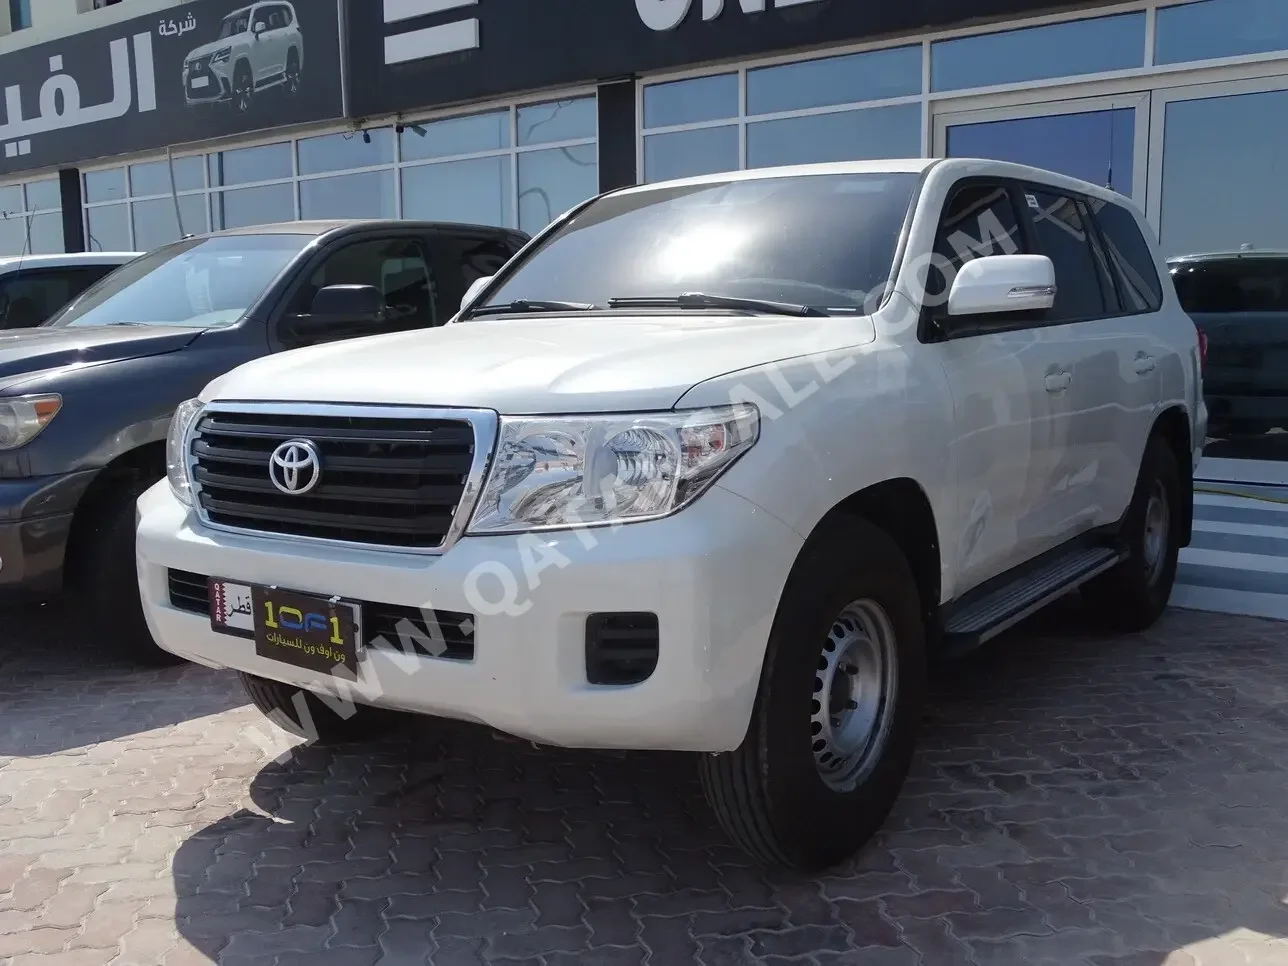 Toyota  Land Cruiser  G  2013  Automatic  283,000 Km  6 Cylinder  Four Wheel Drive (4WD)  SUV  White